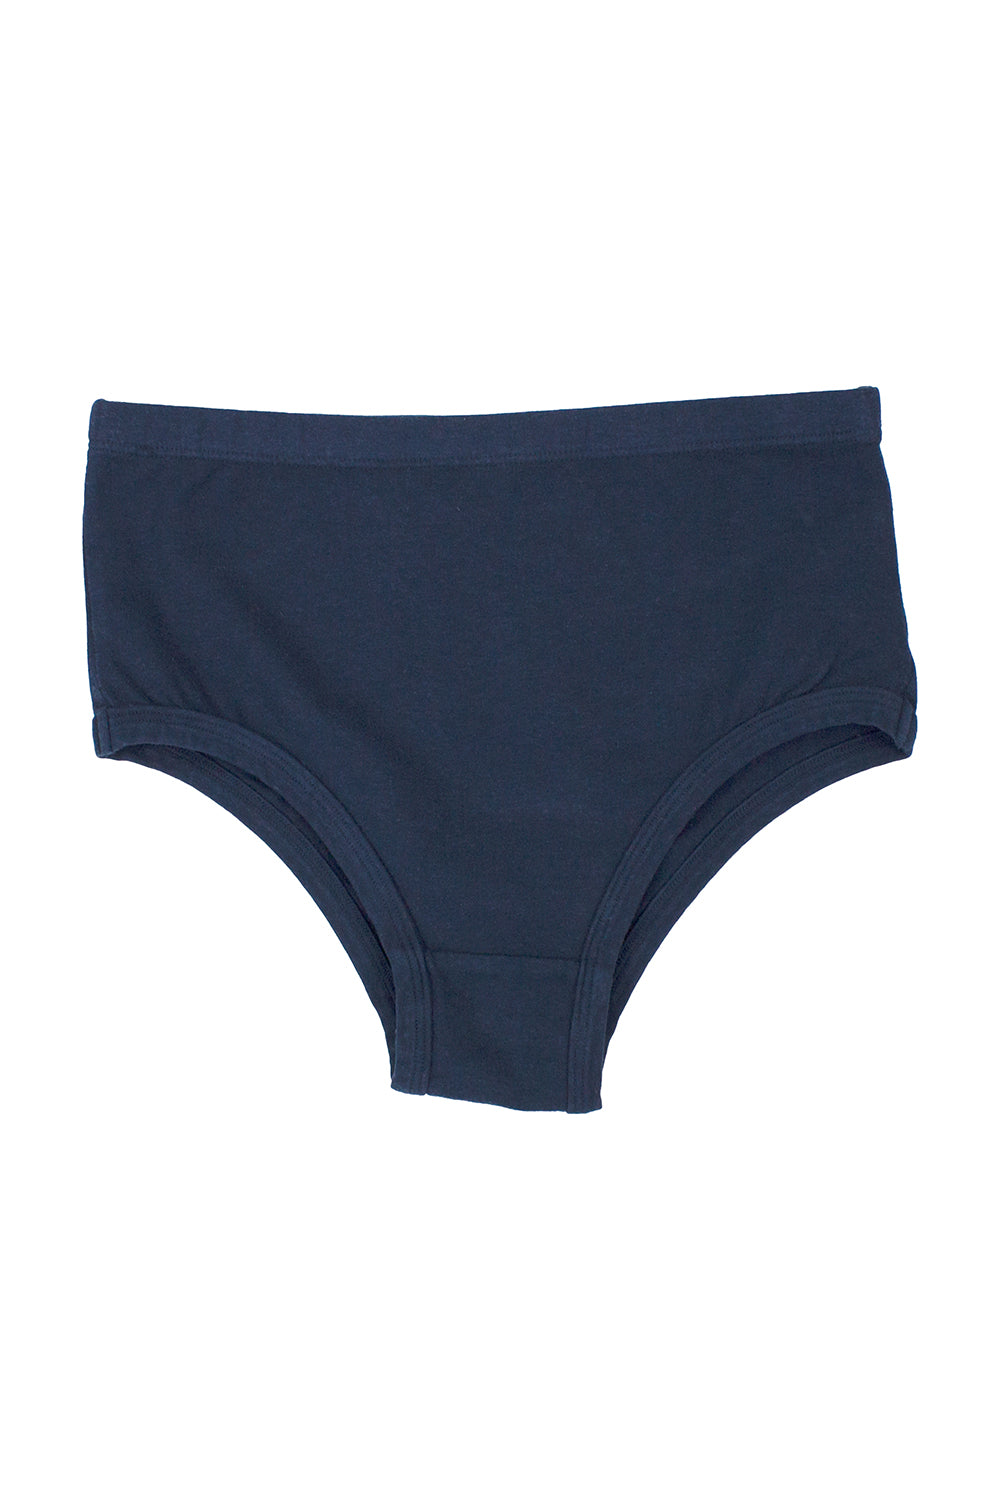 NEW Navy Blue Cotton Size 12 / 14 School Knickers Full Briefs High